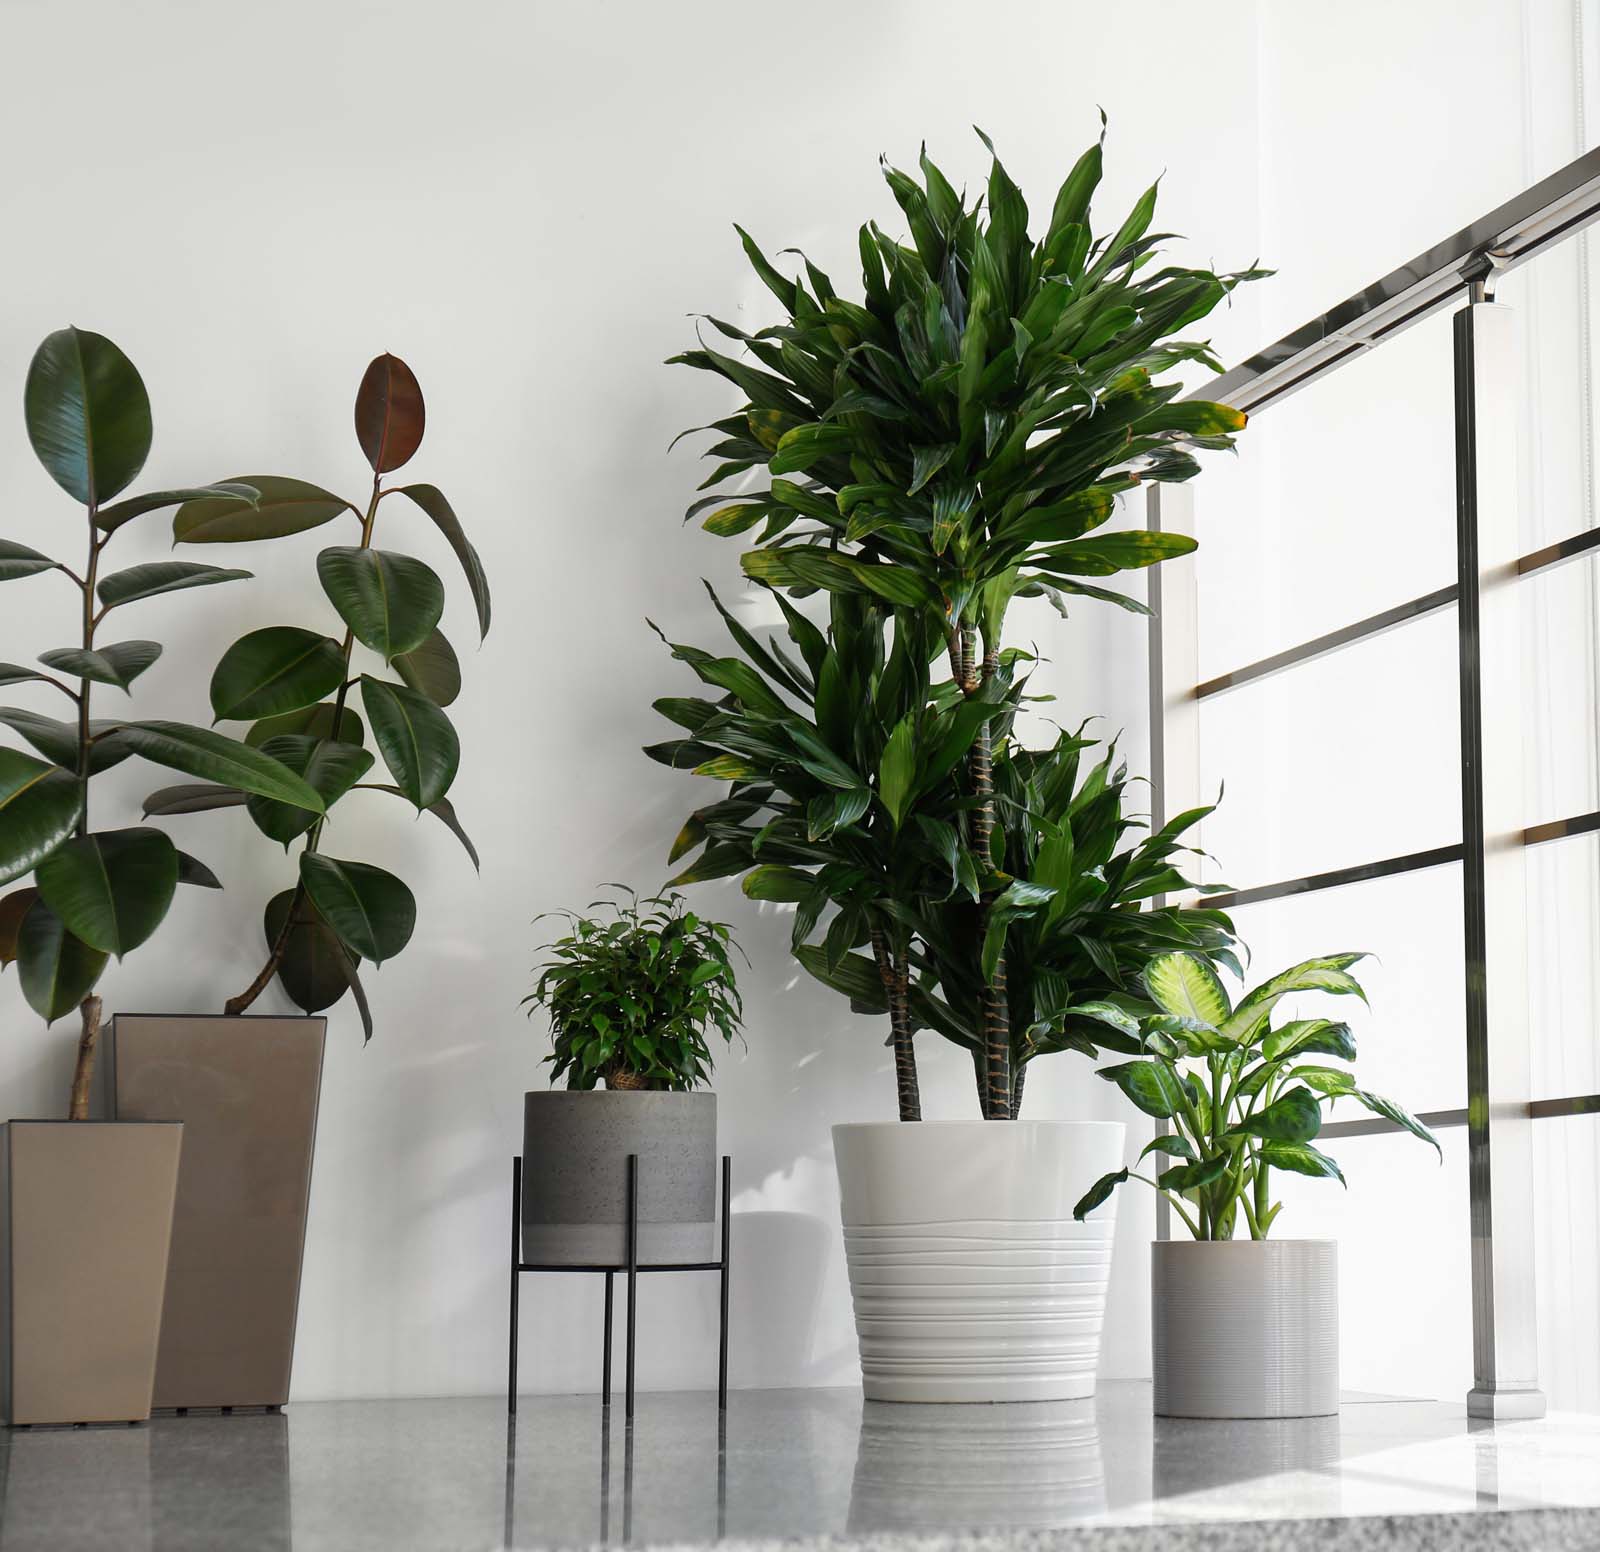 Office plants at window in an interior landscape.